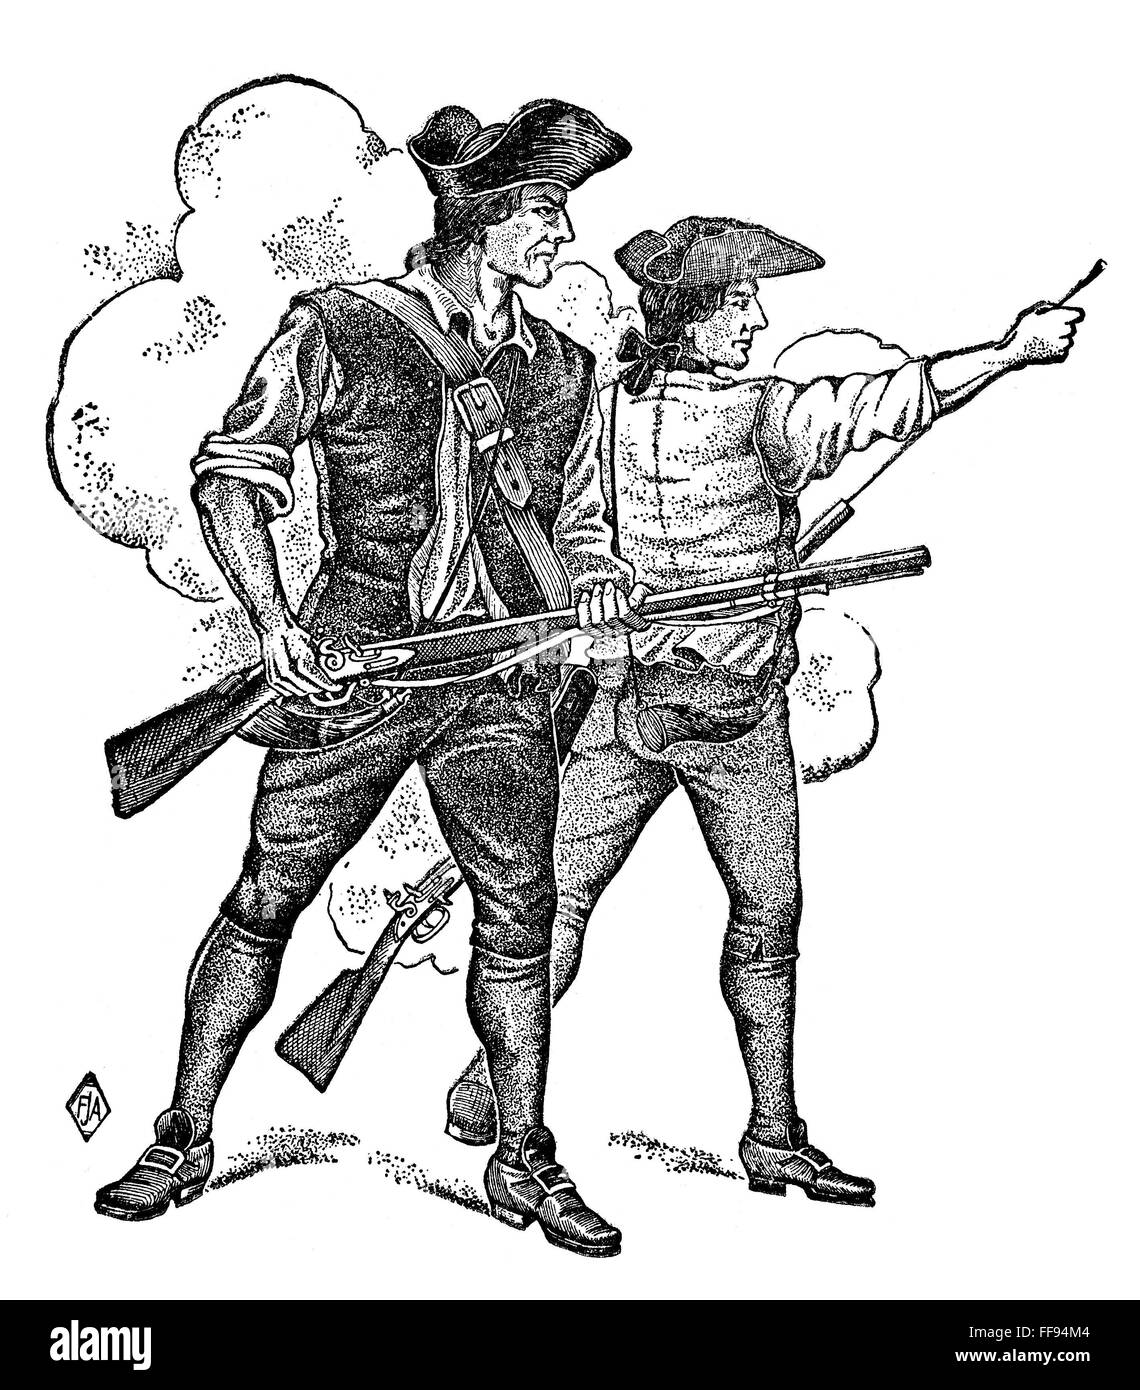 MINUTEMEN, 1770s. /nLithograph, American, late 19th century. Stock Photo